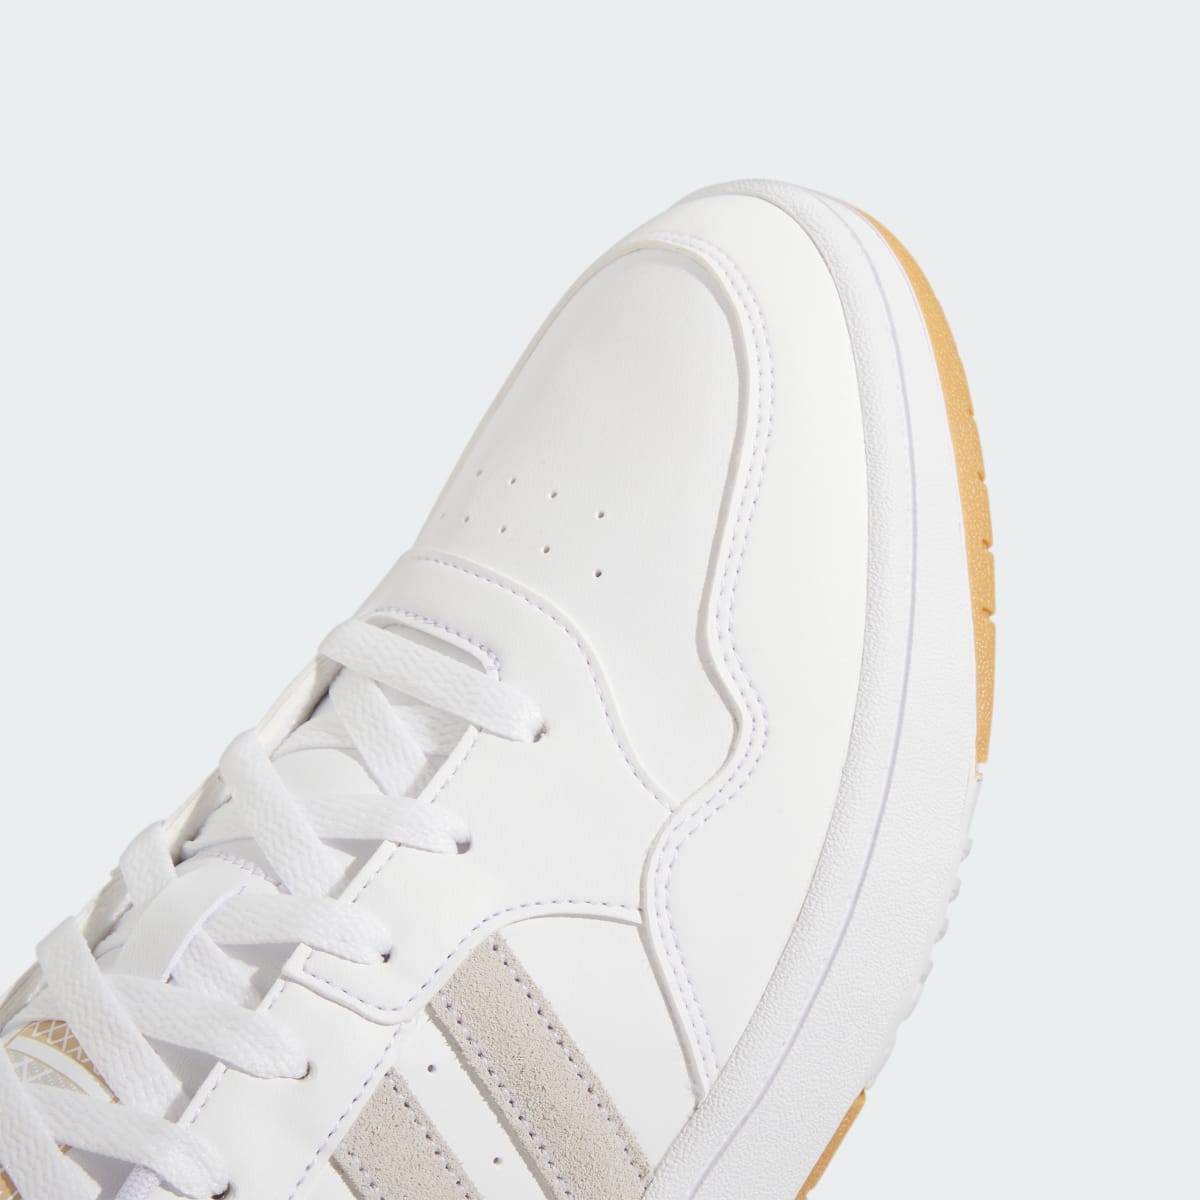 Adidas Hoops 3.0 Low Classic Vintage Shoes. 8